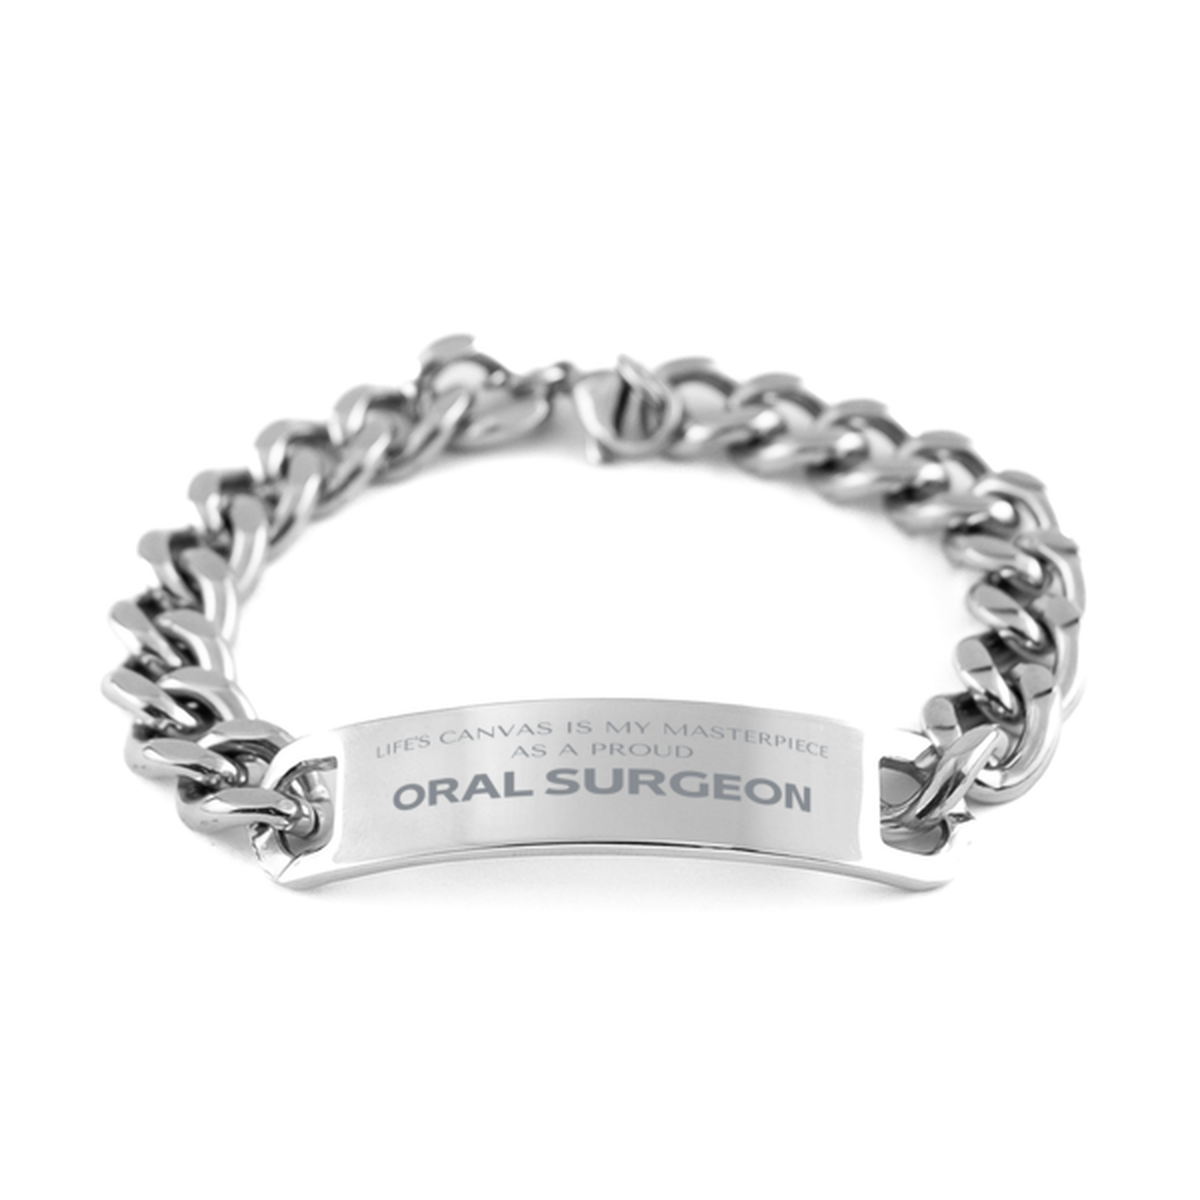 Proud Oral Surgeon Gifts, Life's canvas is my masterpiece, Epic Birthday Christmas Unique Cuban Chain Stainless Steel Bracelet For Oral Surgeon, Coworkers, Men, Women, Friends